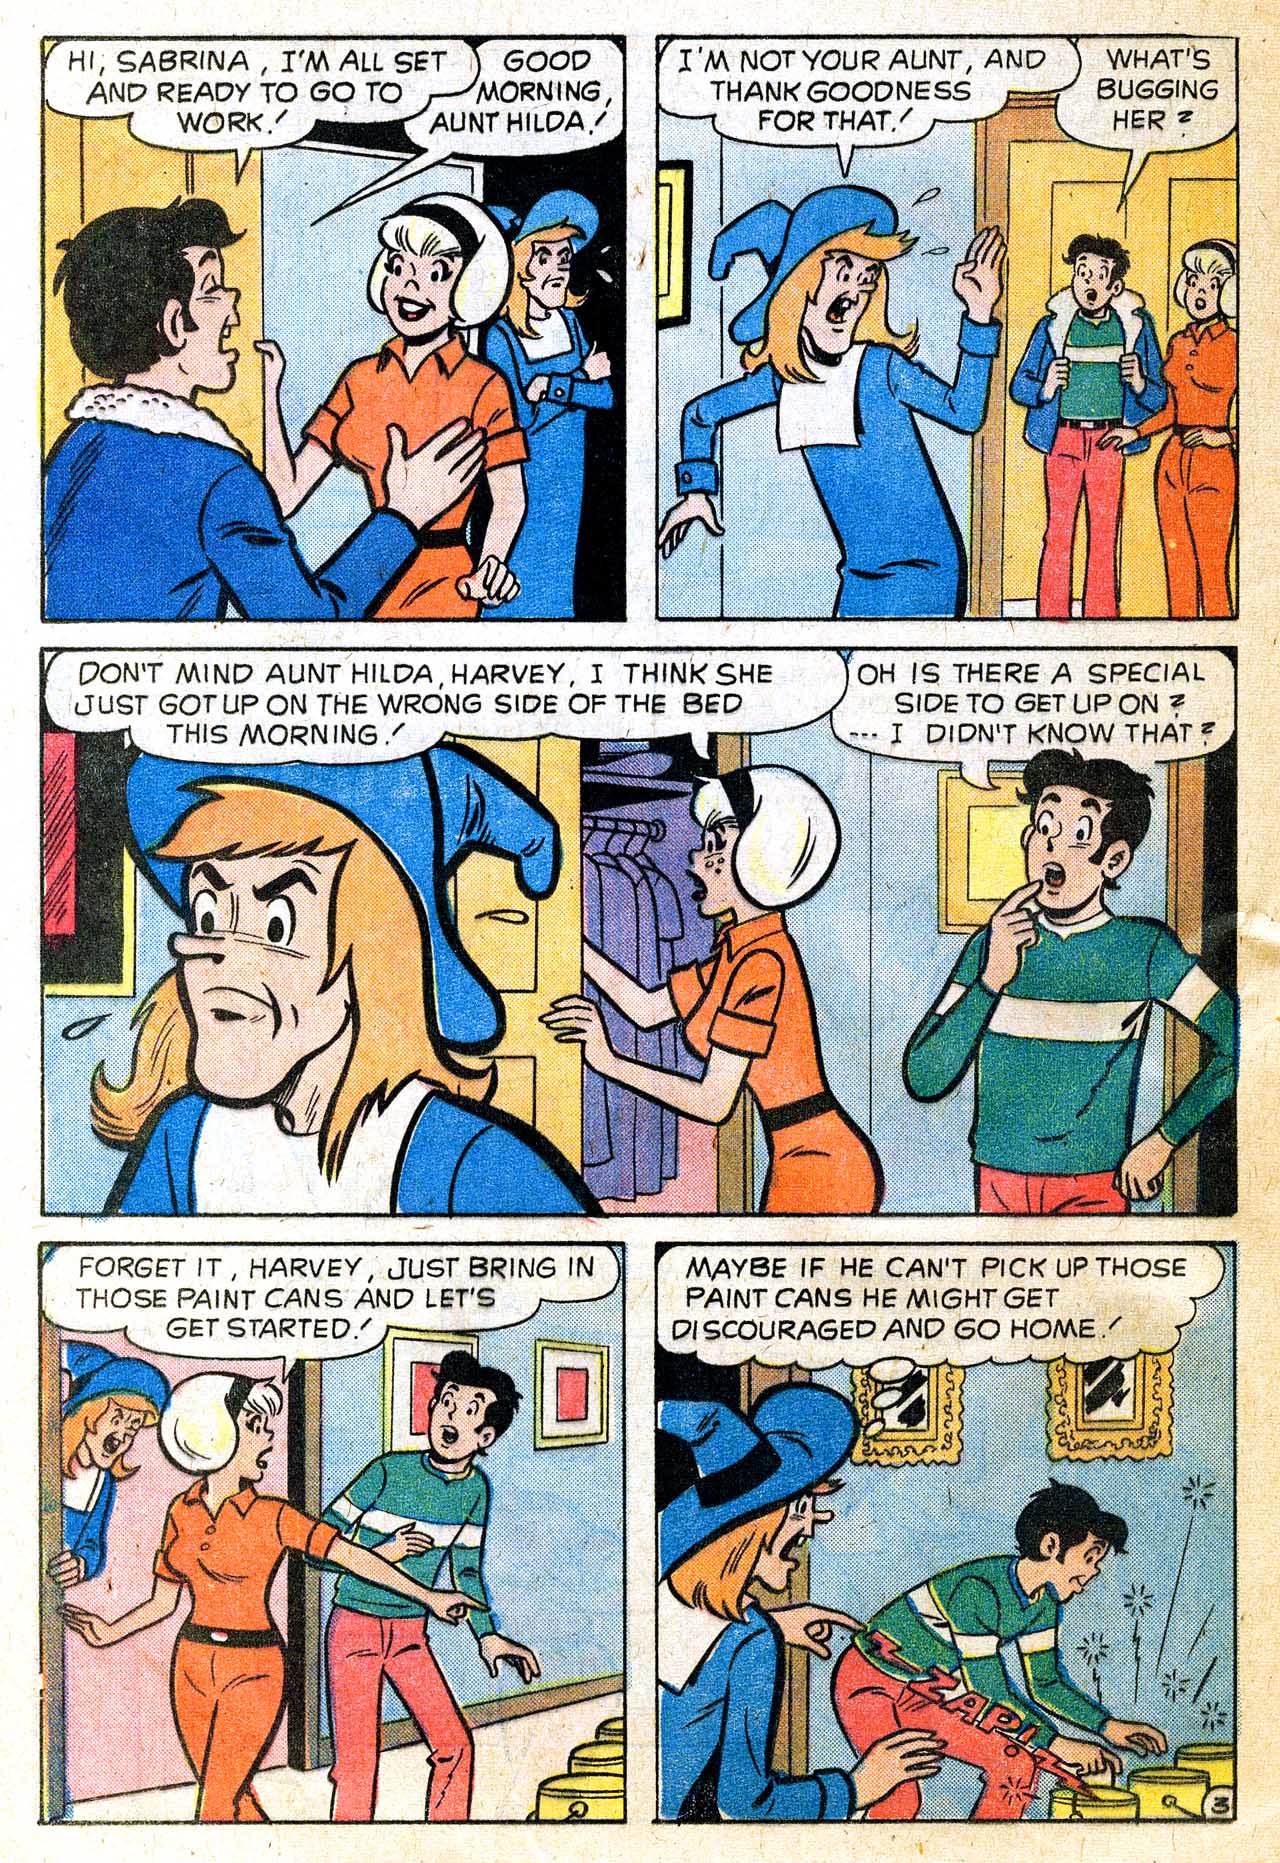 Sabrina The Teenage Witch (1971) Issue #18 #18 - English 16